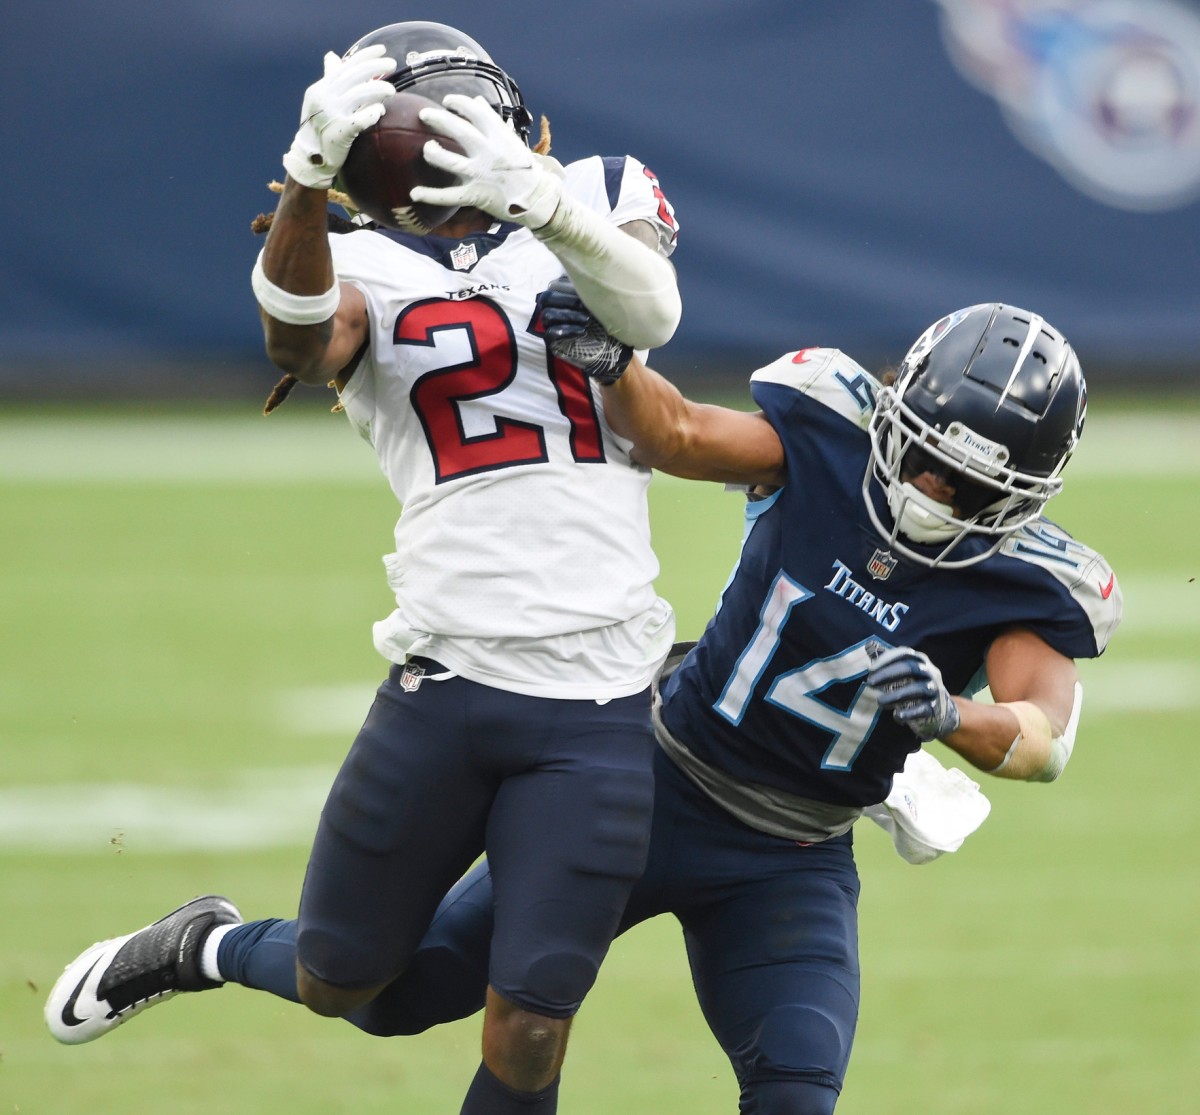 Houston Texans cornerback Bradley Roby (21) pulls in an interception of a pass intended for Titans receiver Kalif Raymond (14) George Walker IV/ Tennessean.com via Imagn Content Services, LLC